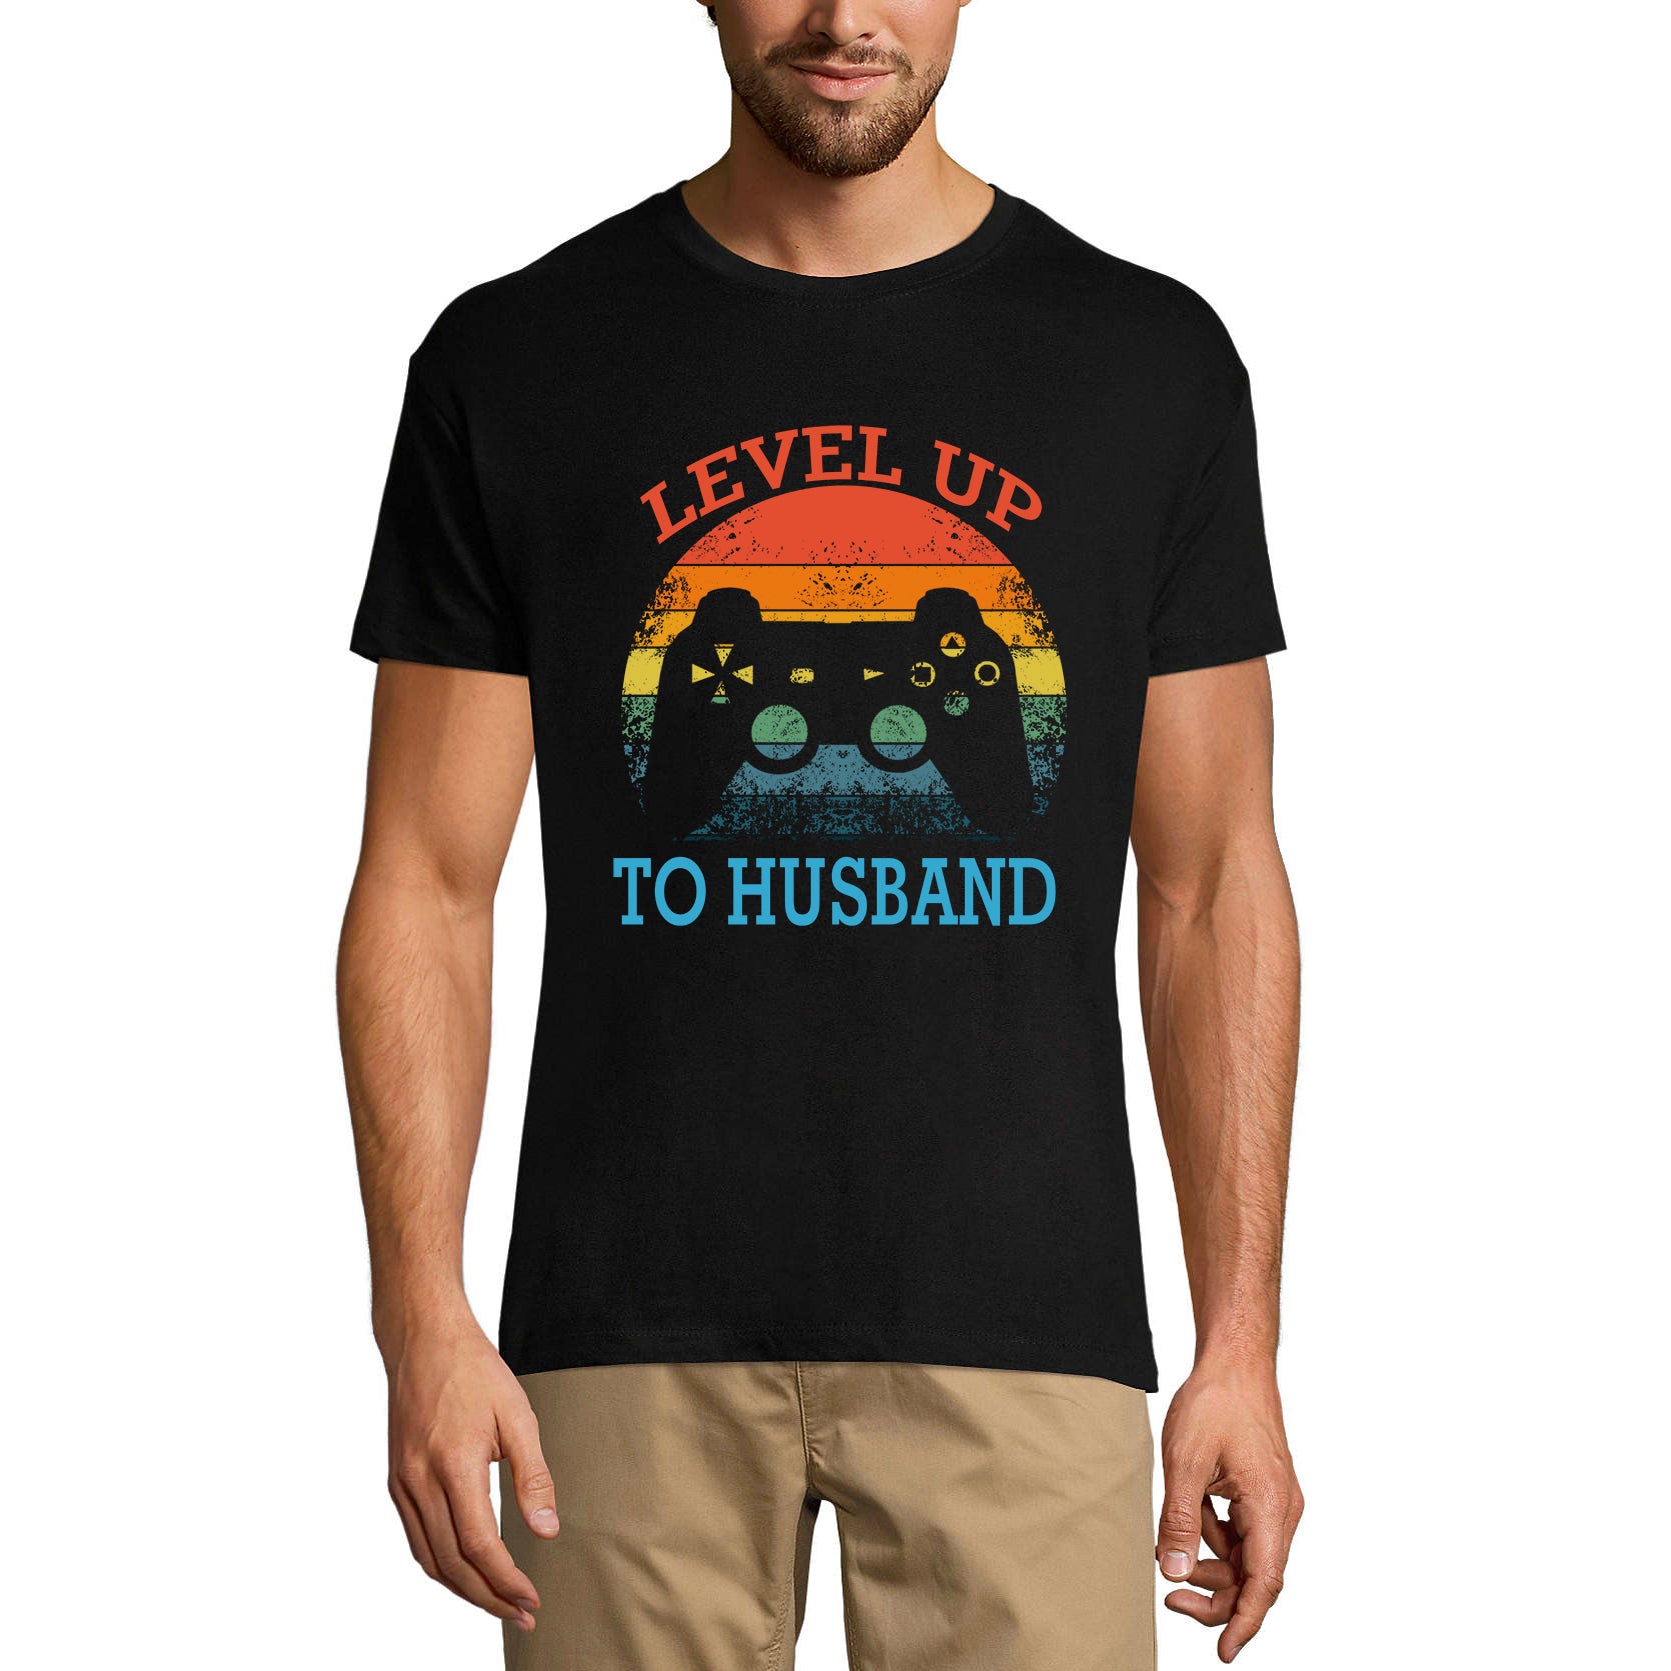 ULTRABASIC Men's Graphic T-Shirt Level up to Husband - Funny Gaming Shirt for Him husband level up dad gamer i paused my game alien player ufo playstation tee shirt clothes gaming apparel gifts super mario nintendo call of duty graphic tshirt video game funny geek gift for the gamer fortnite pubg humor son father birthday